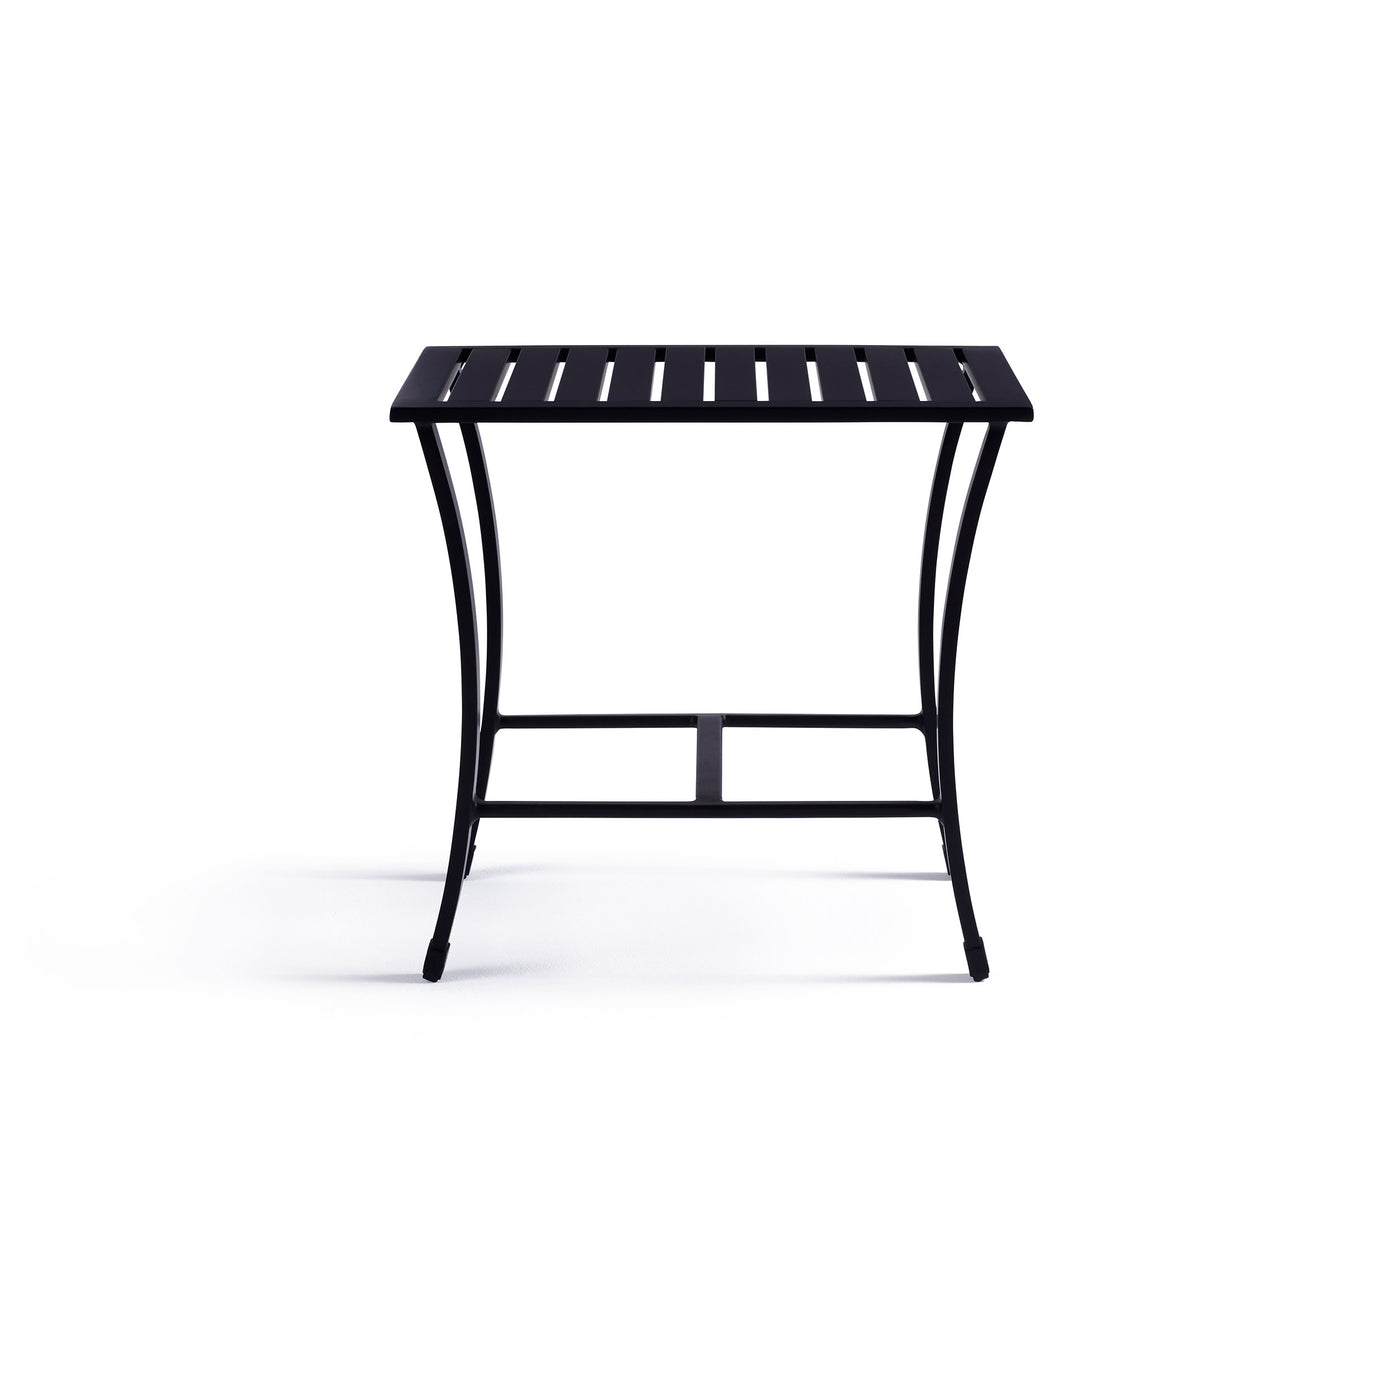  Yardbird Colby Outdoor Side Table Outdoor Furniture